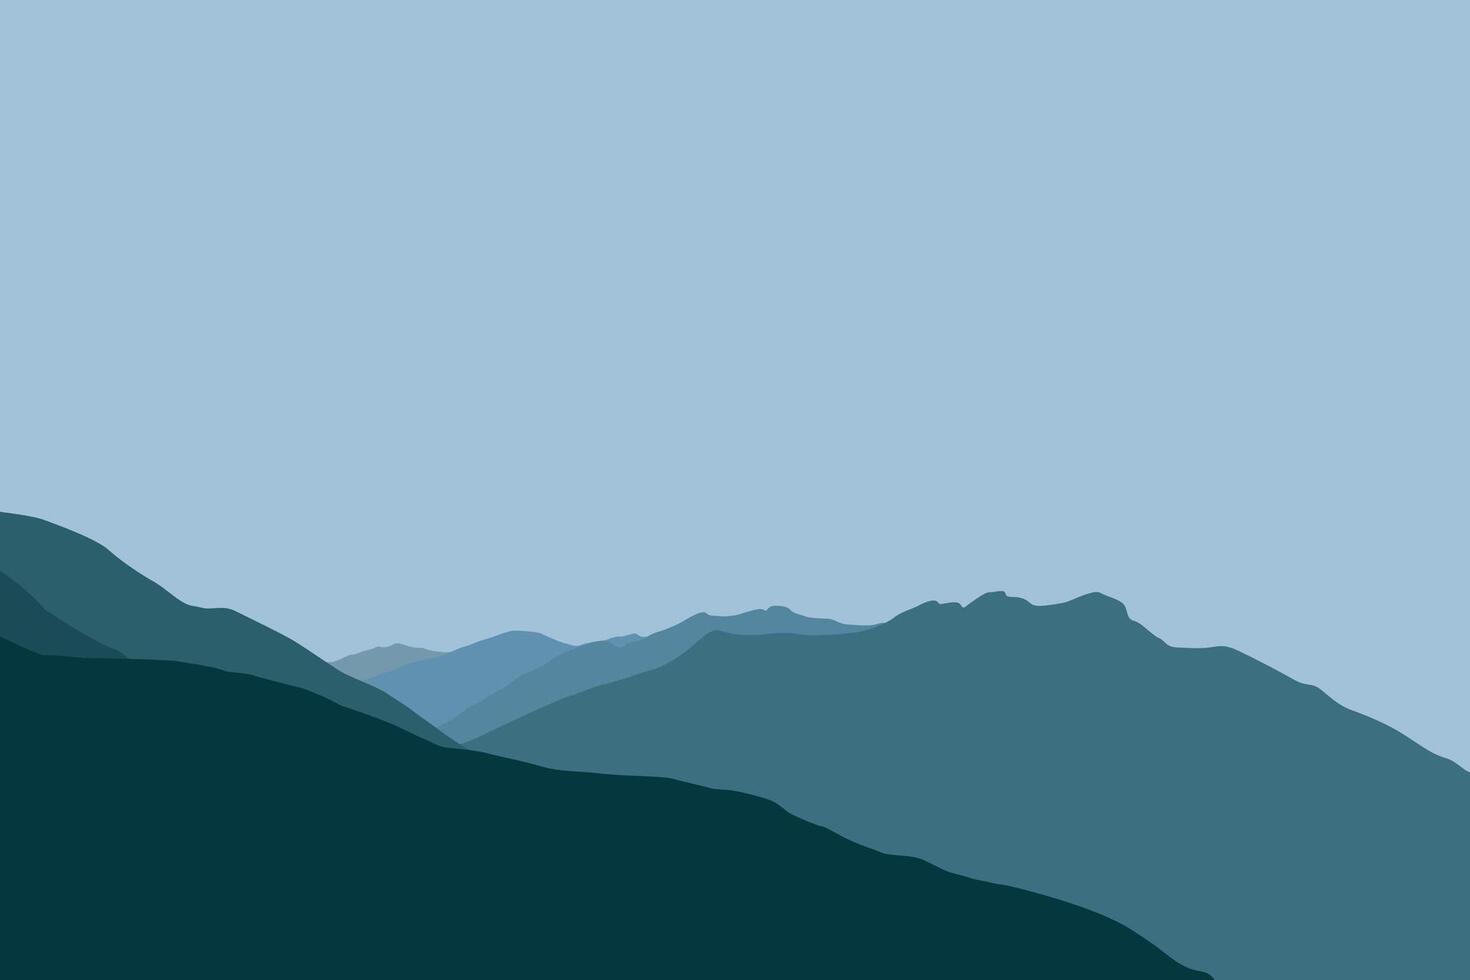 mountains landscape panorama design. Illustration in flat style. vector